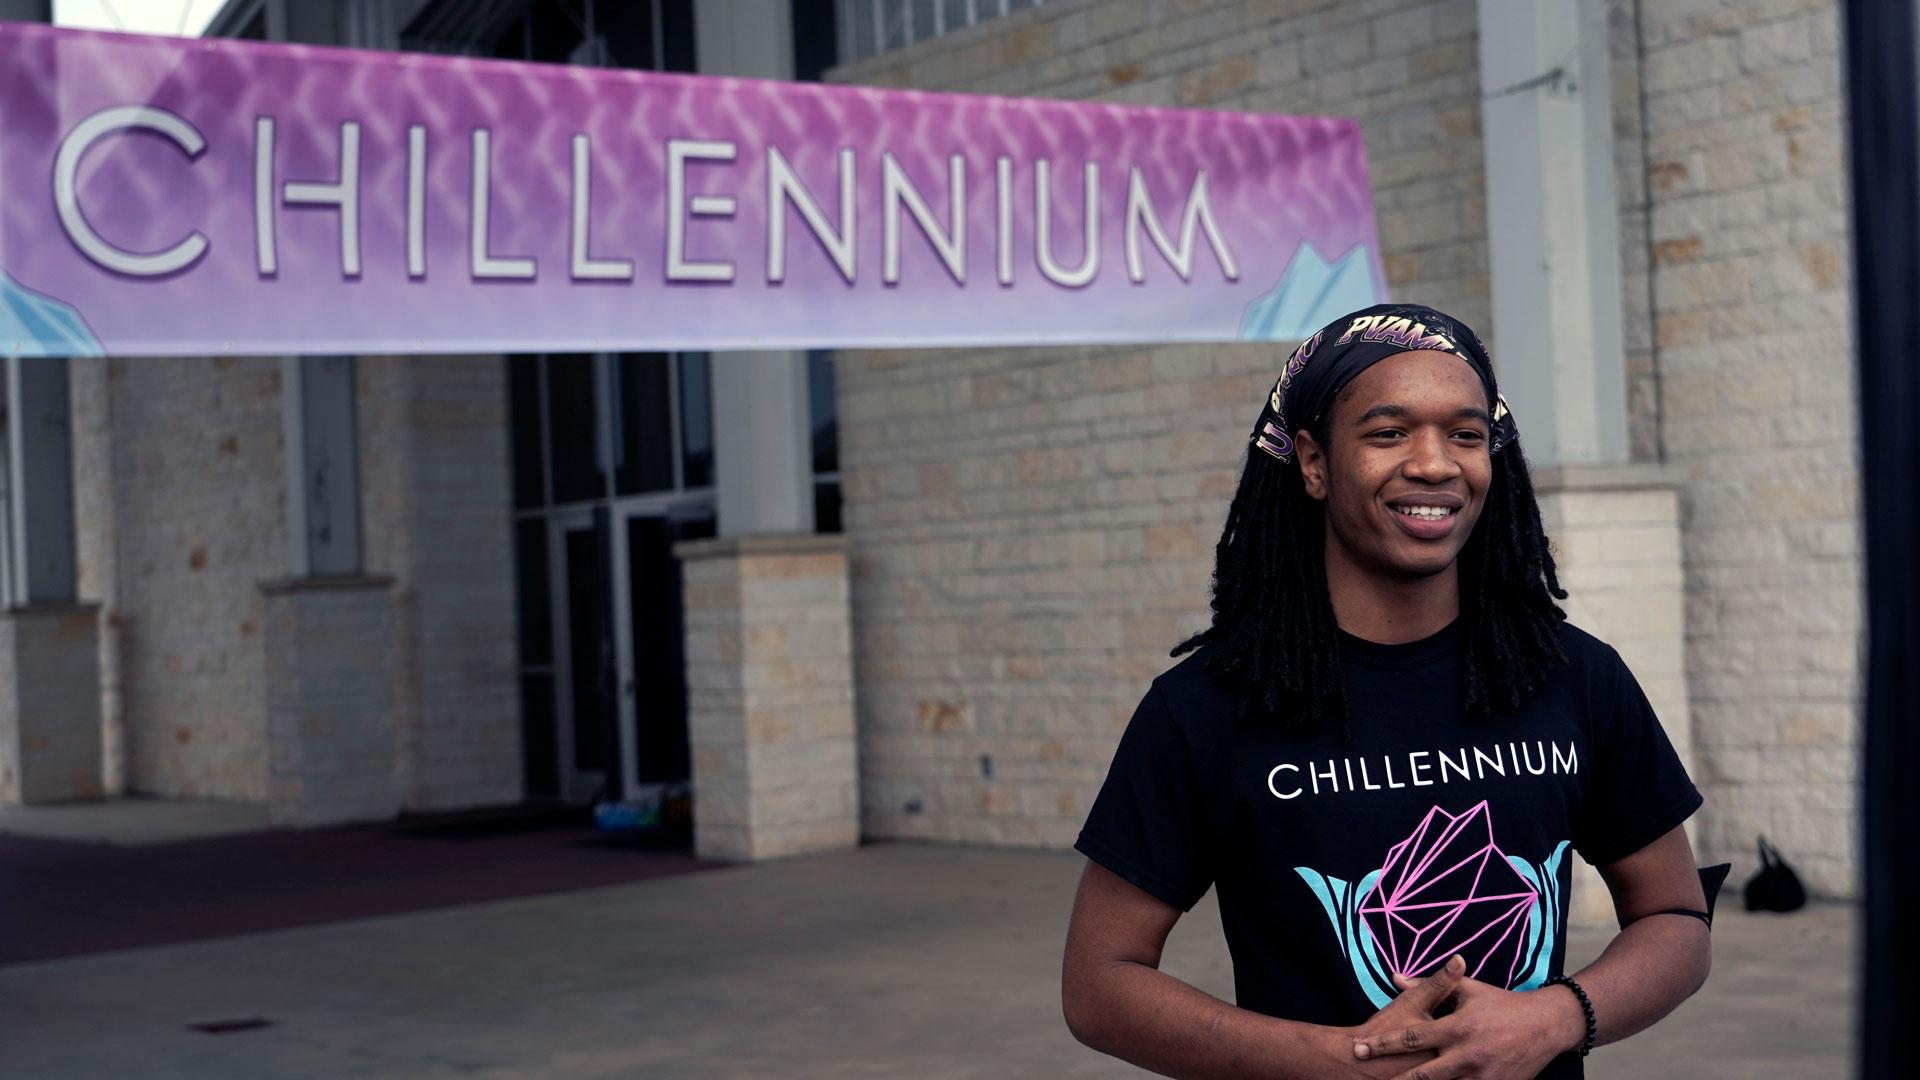 Chillennium participant Wayne Page discusses his plan for the 48-hour video game design competition, as featured on Season 2 of "Texas A&M Today."